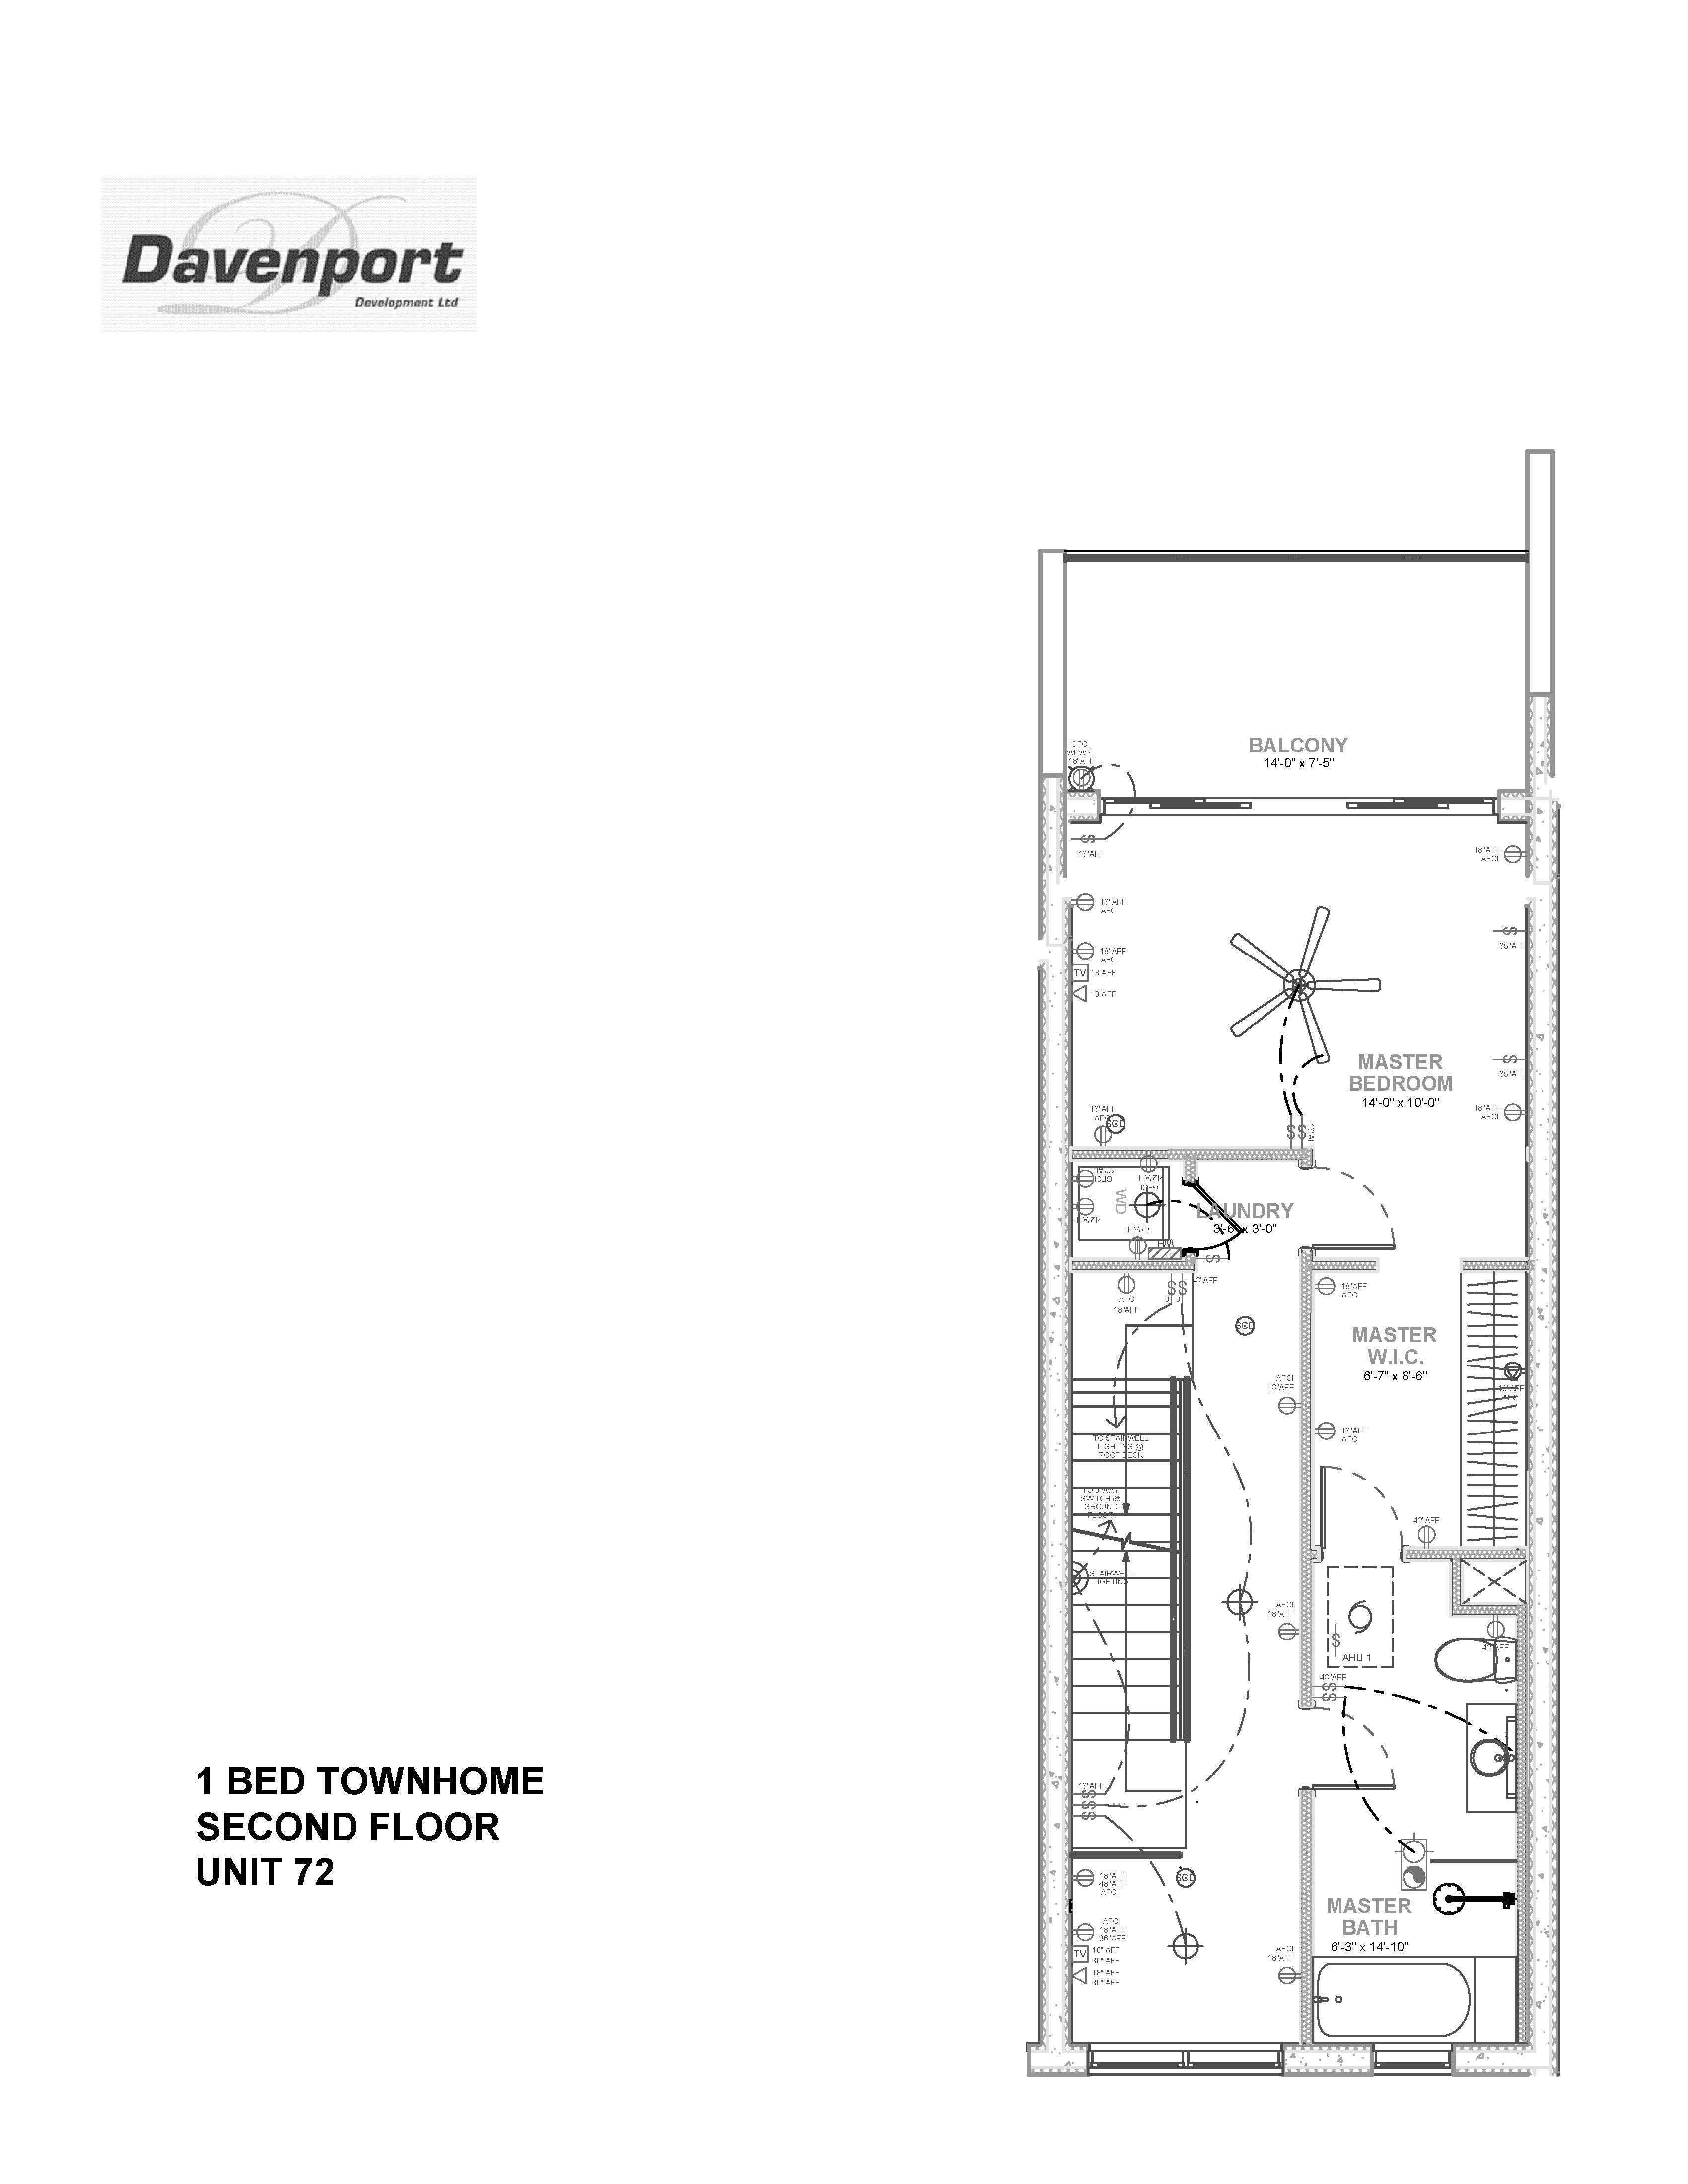 SITE PLAN OF TOWNHOUSE IN BAHIA